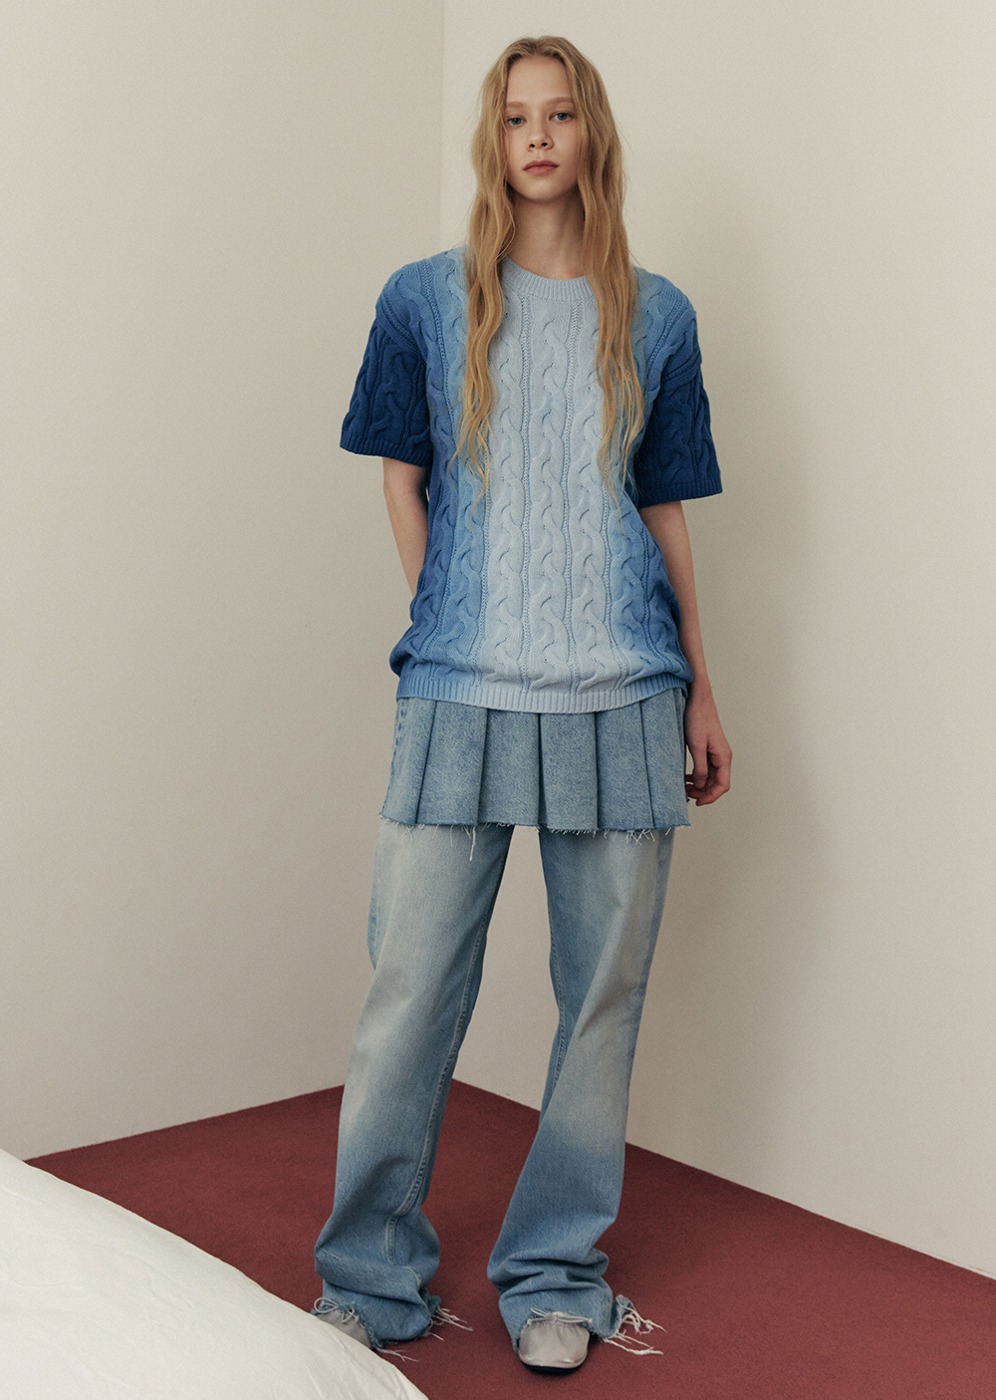 Gradation Washing Cable Knit Top [BLUE]Gradation Washing Cable Knit Top [BLUE]로씨로씨